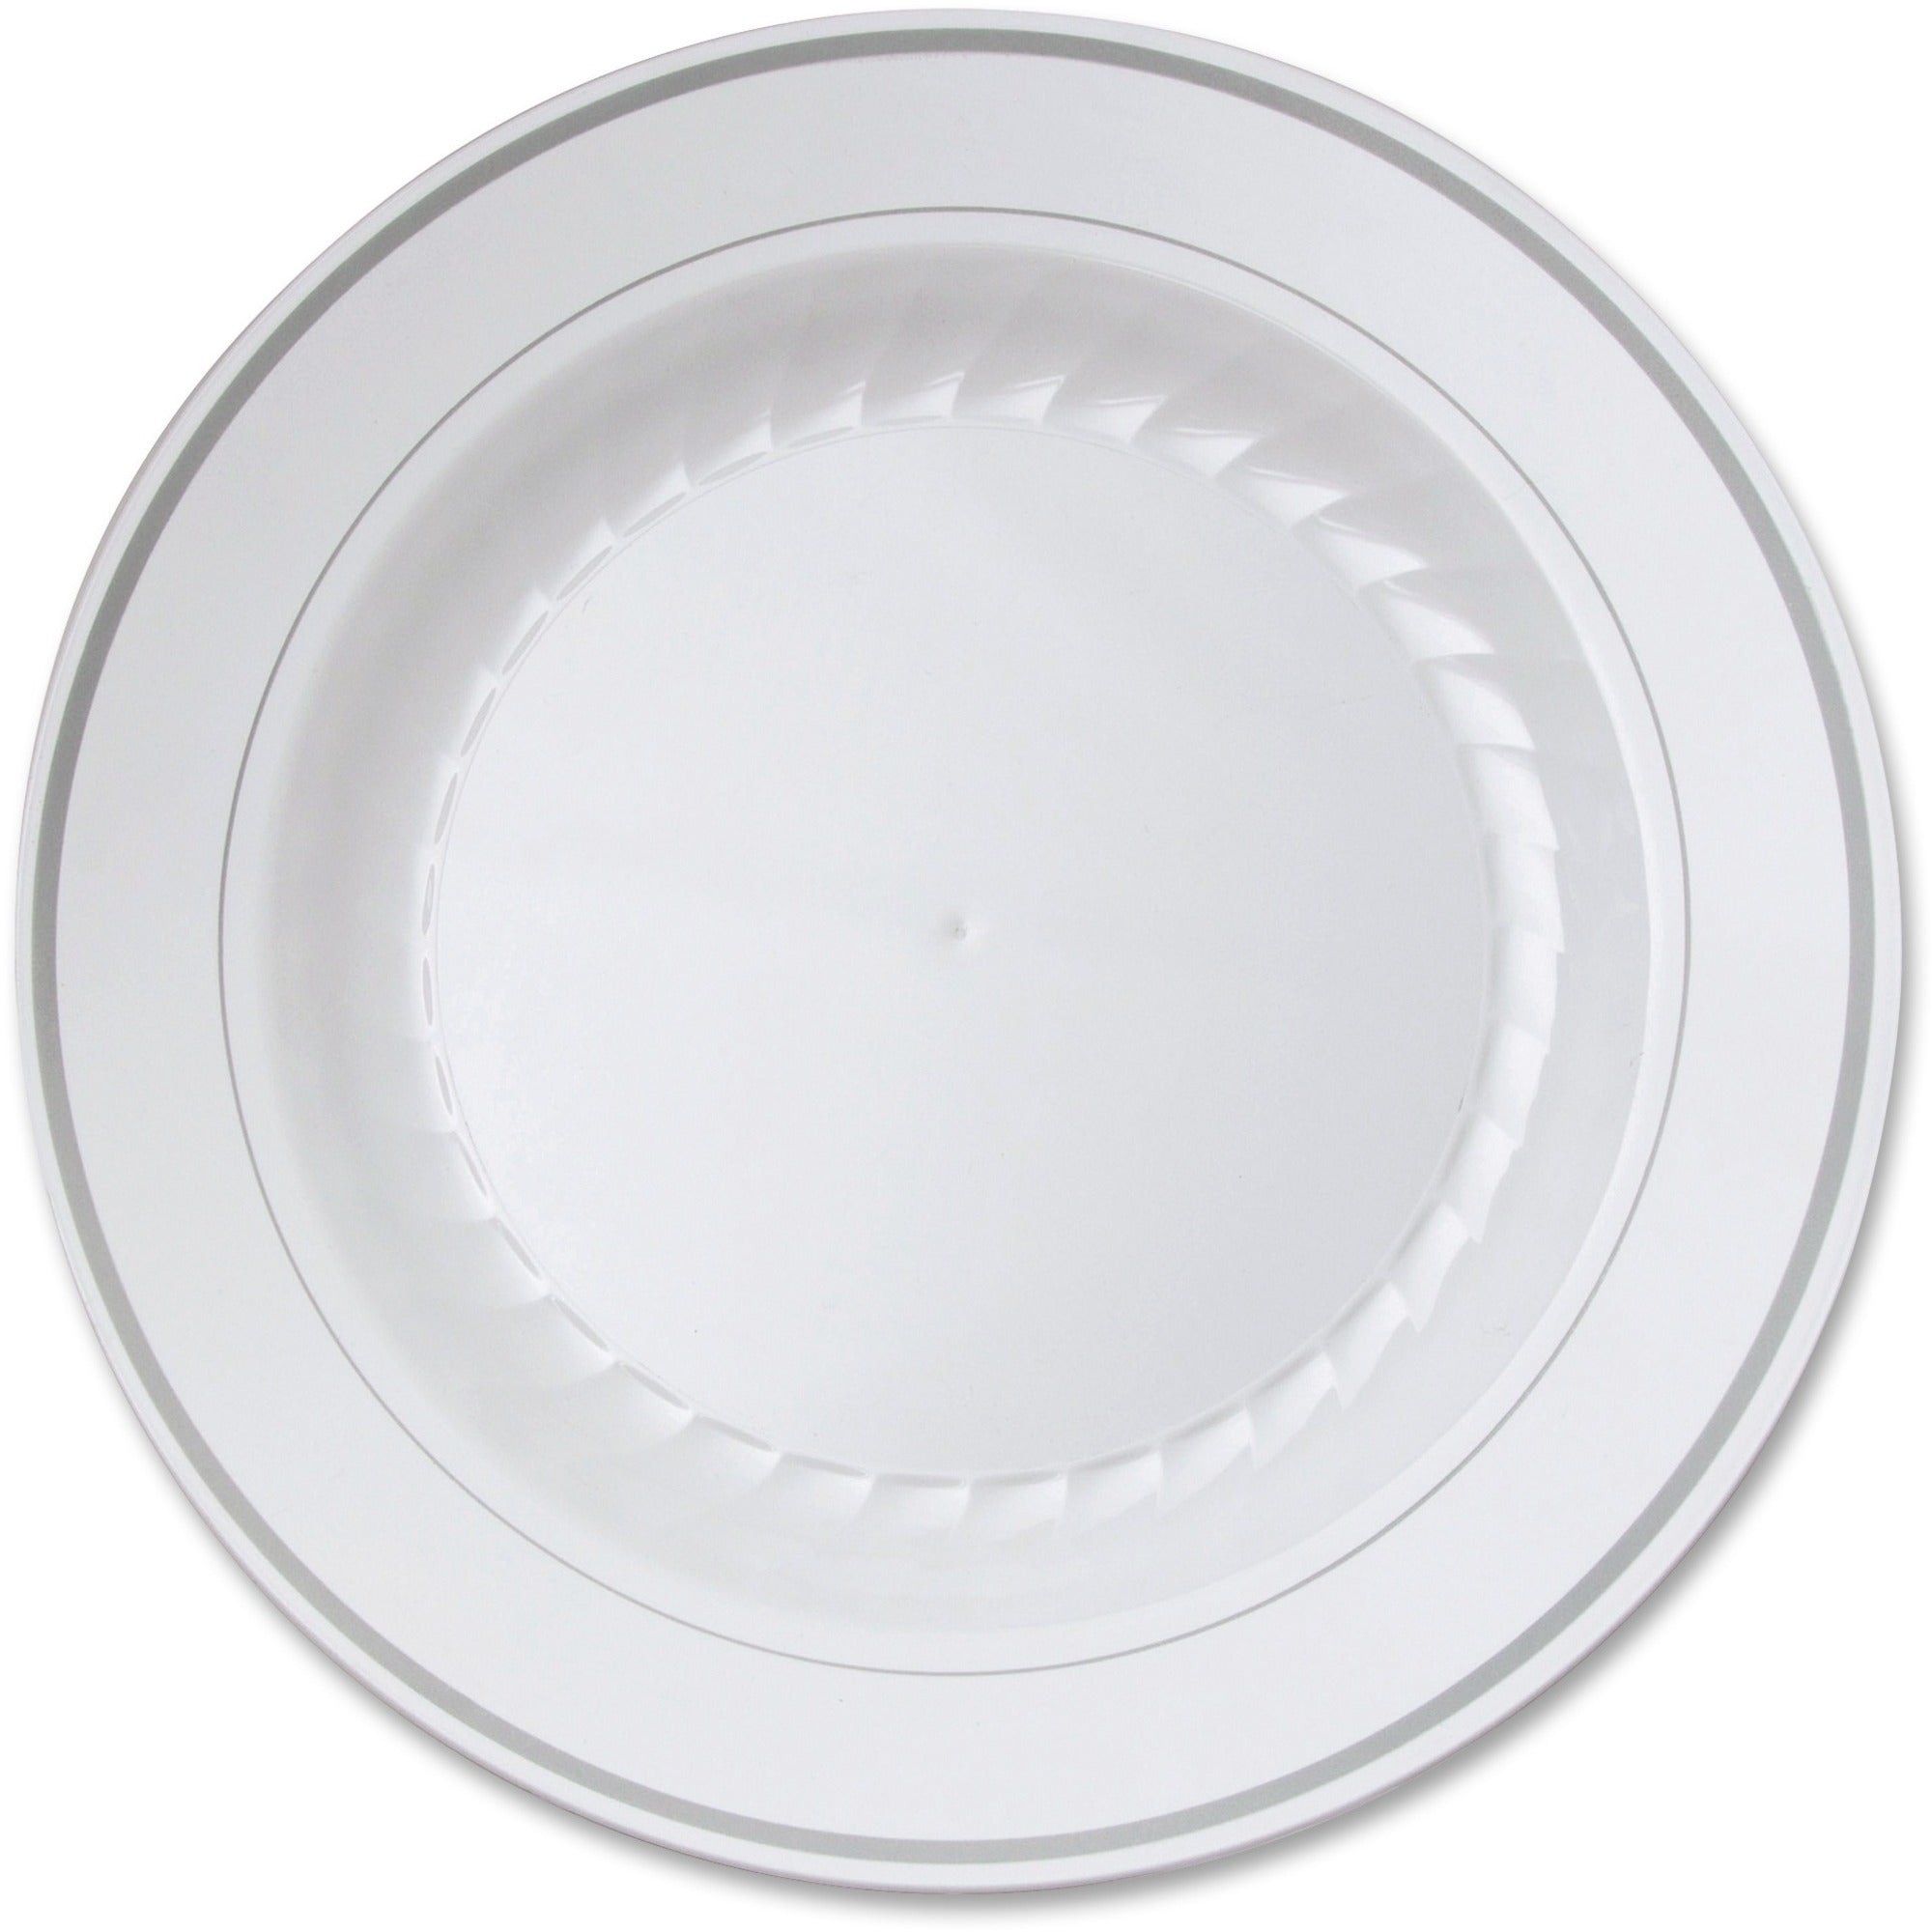 masterpiece-10-1-4-heavyweight-plates-10-pack-picnic-party-disposable-white-plastic-body-12-carton_wnarsmp101210ct - 1